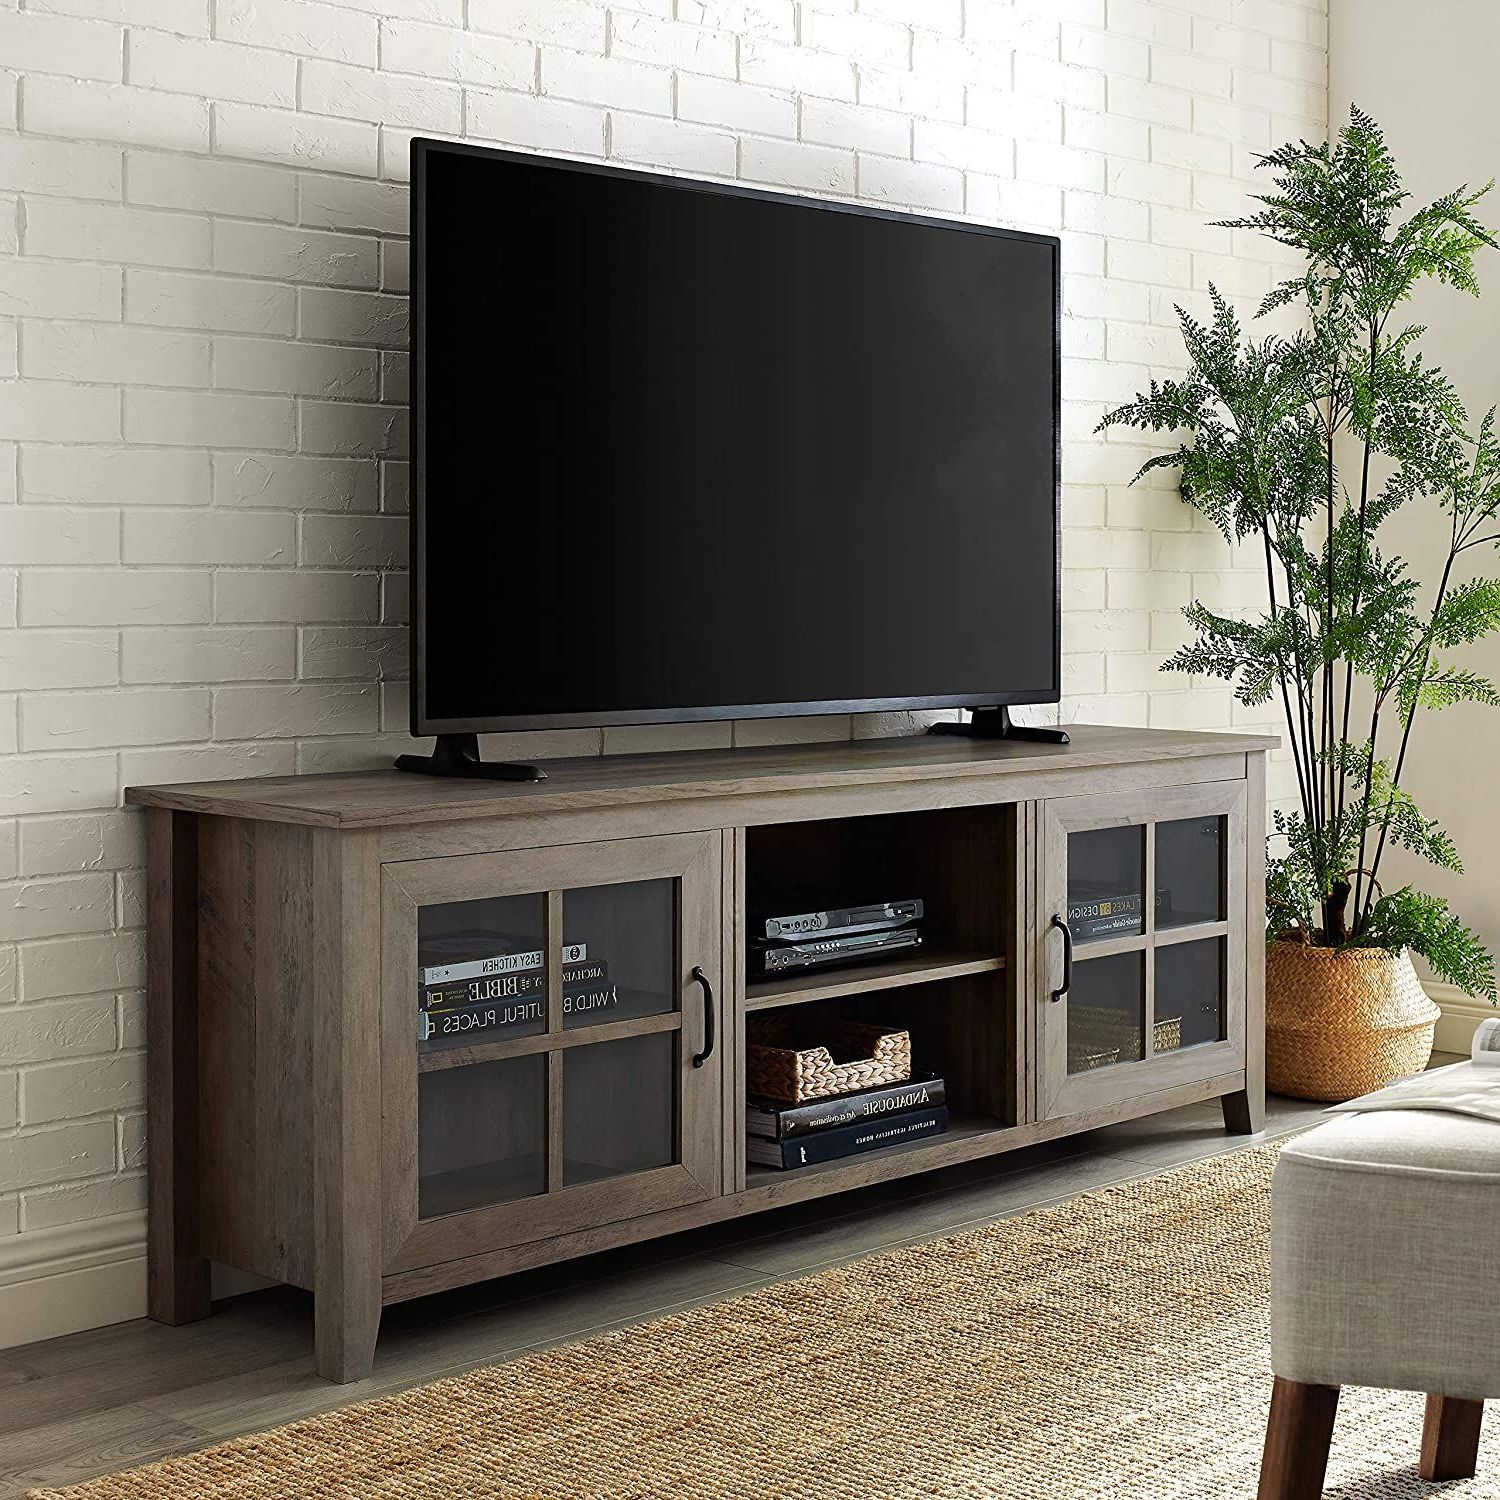 Tv Stand In 2020 | Living Room Storage, Walker Edison Throughout Walker Edison Farmhouse Tv Stands With Storage Cabinet Doors And Shelves (Gallery 4 of 20)